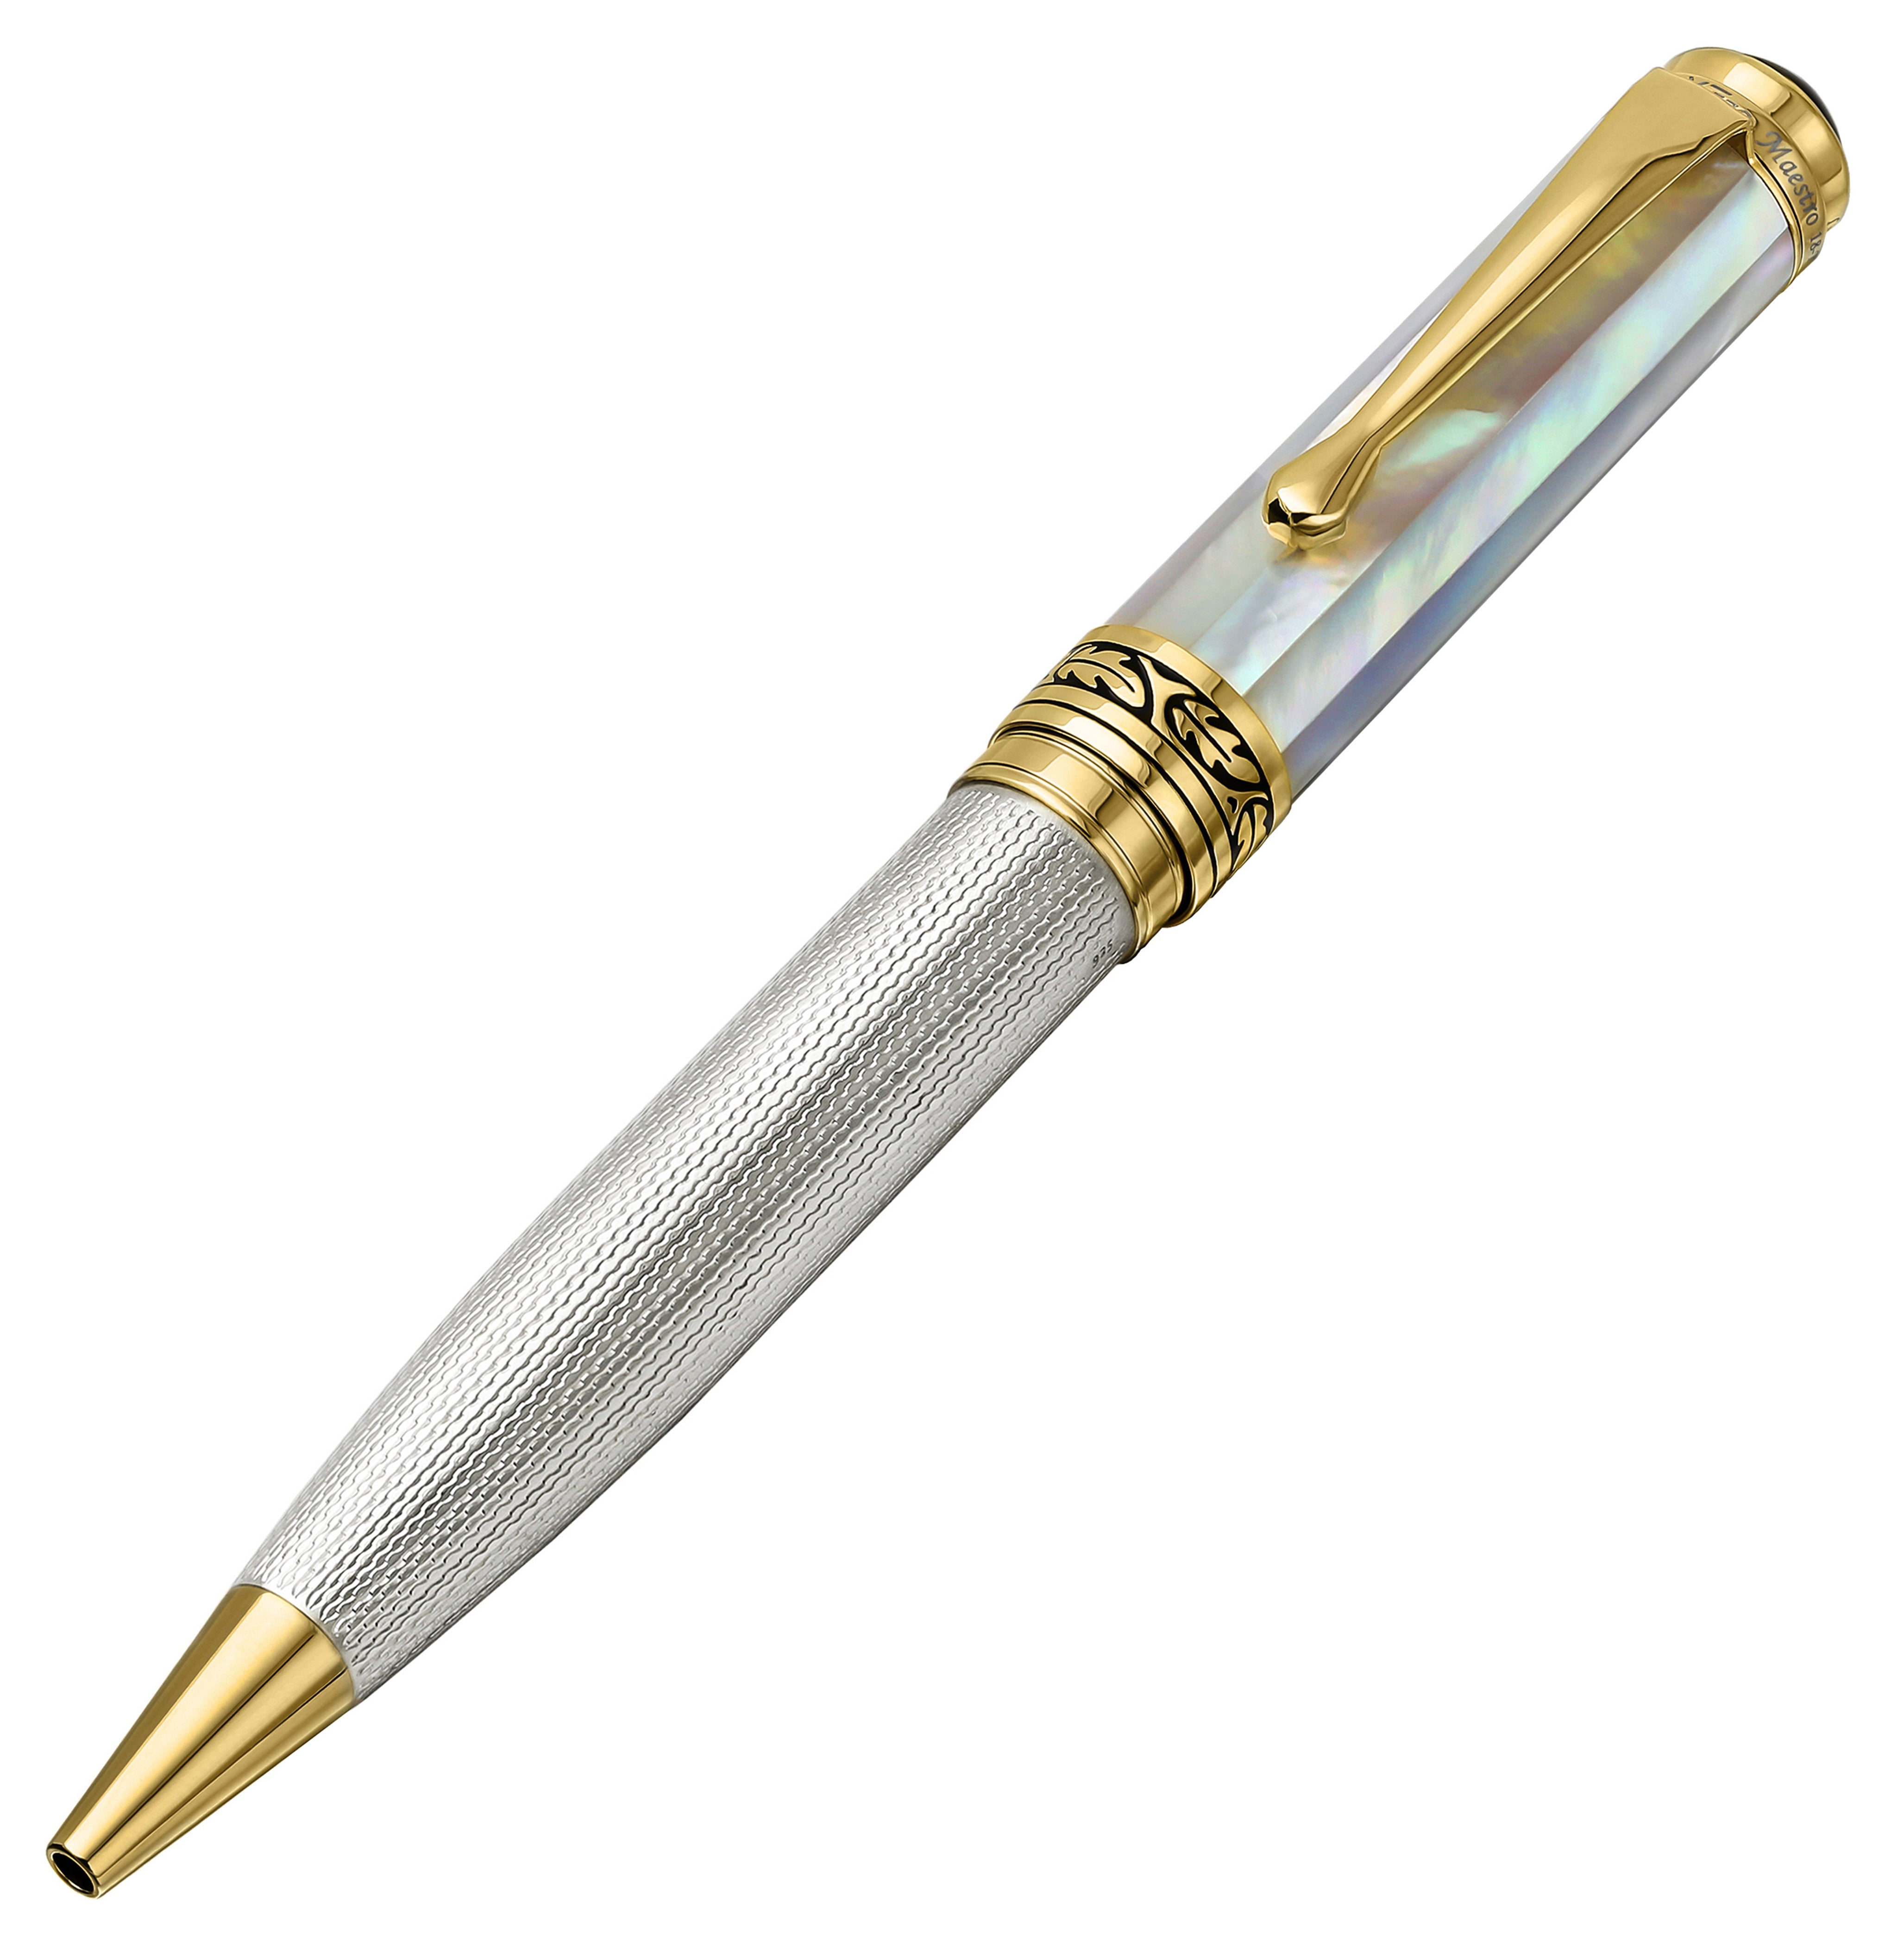 Maestro® 925 Sterling Silver Ballpoint Pen - White Mother of Pearl Cap